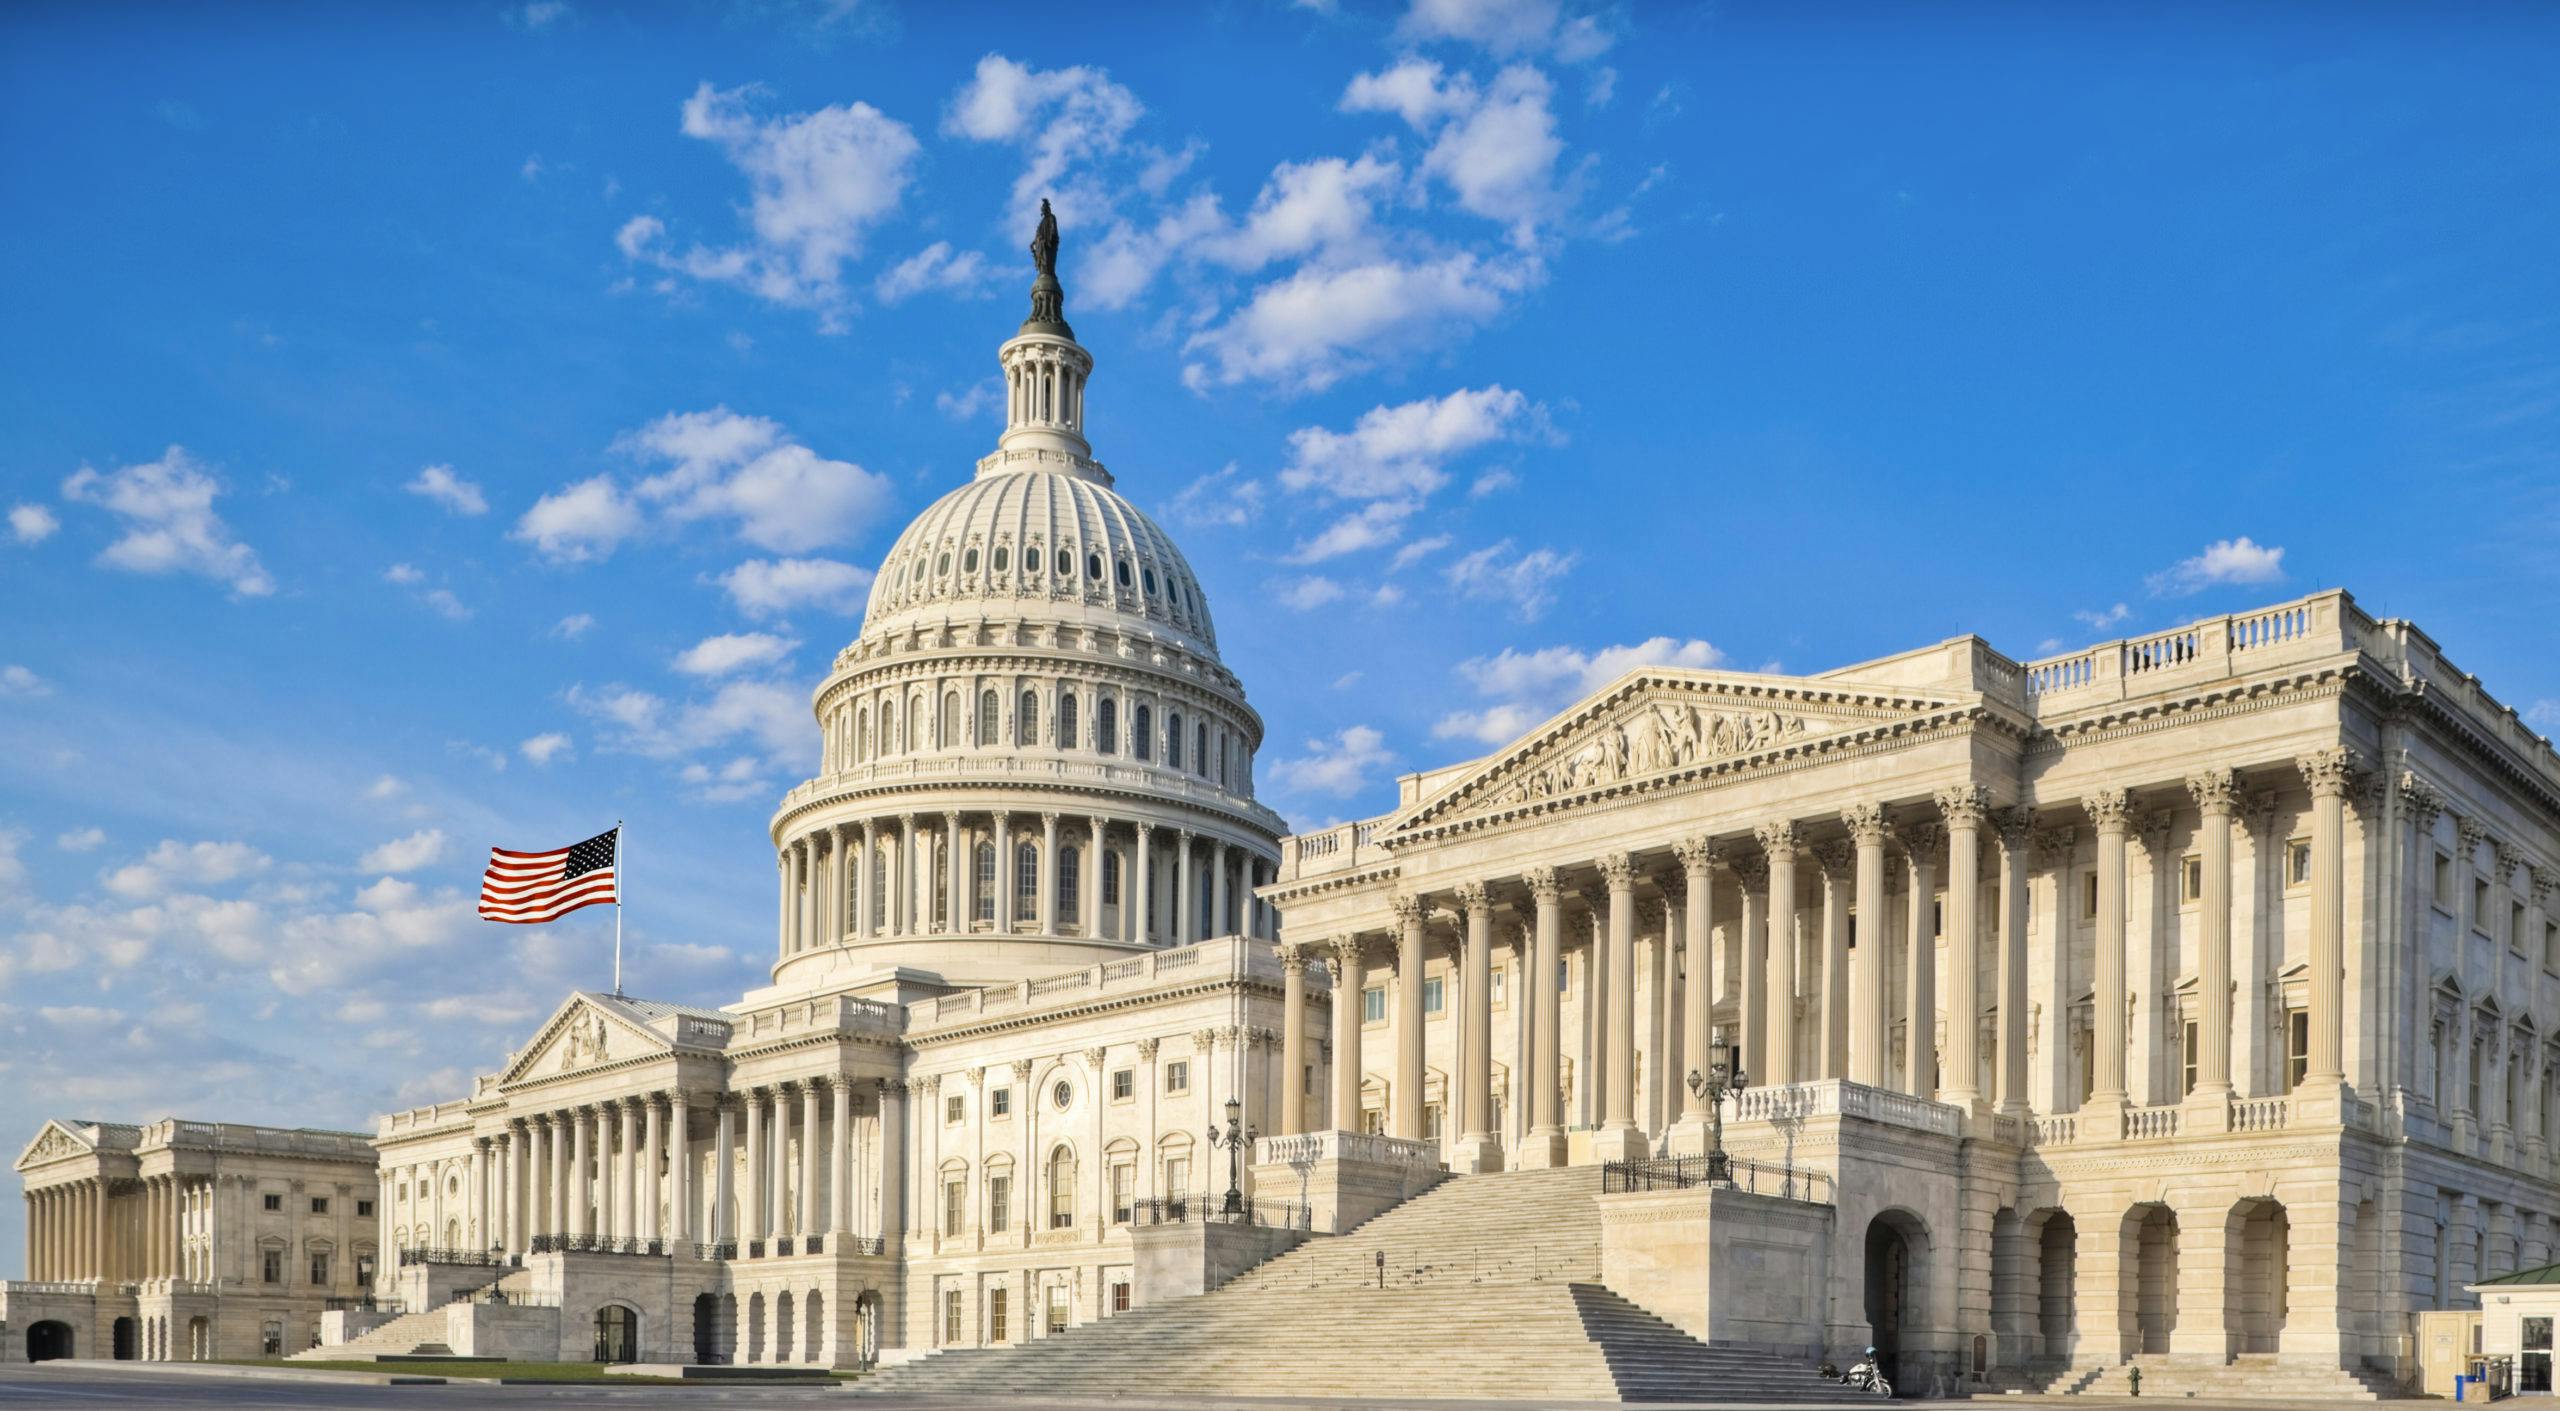 A view of the Capitol building against a blue sky taken from the far right front corner. Related to: government contract vehicle, government contractor, government IT contractor, federal contractor, federal IT contractor, federal IT partner.